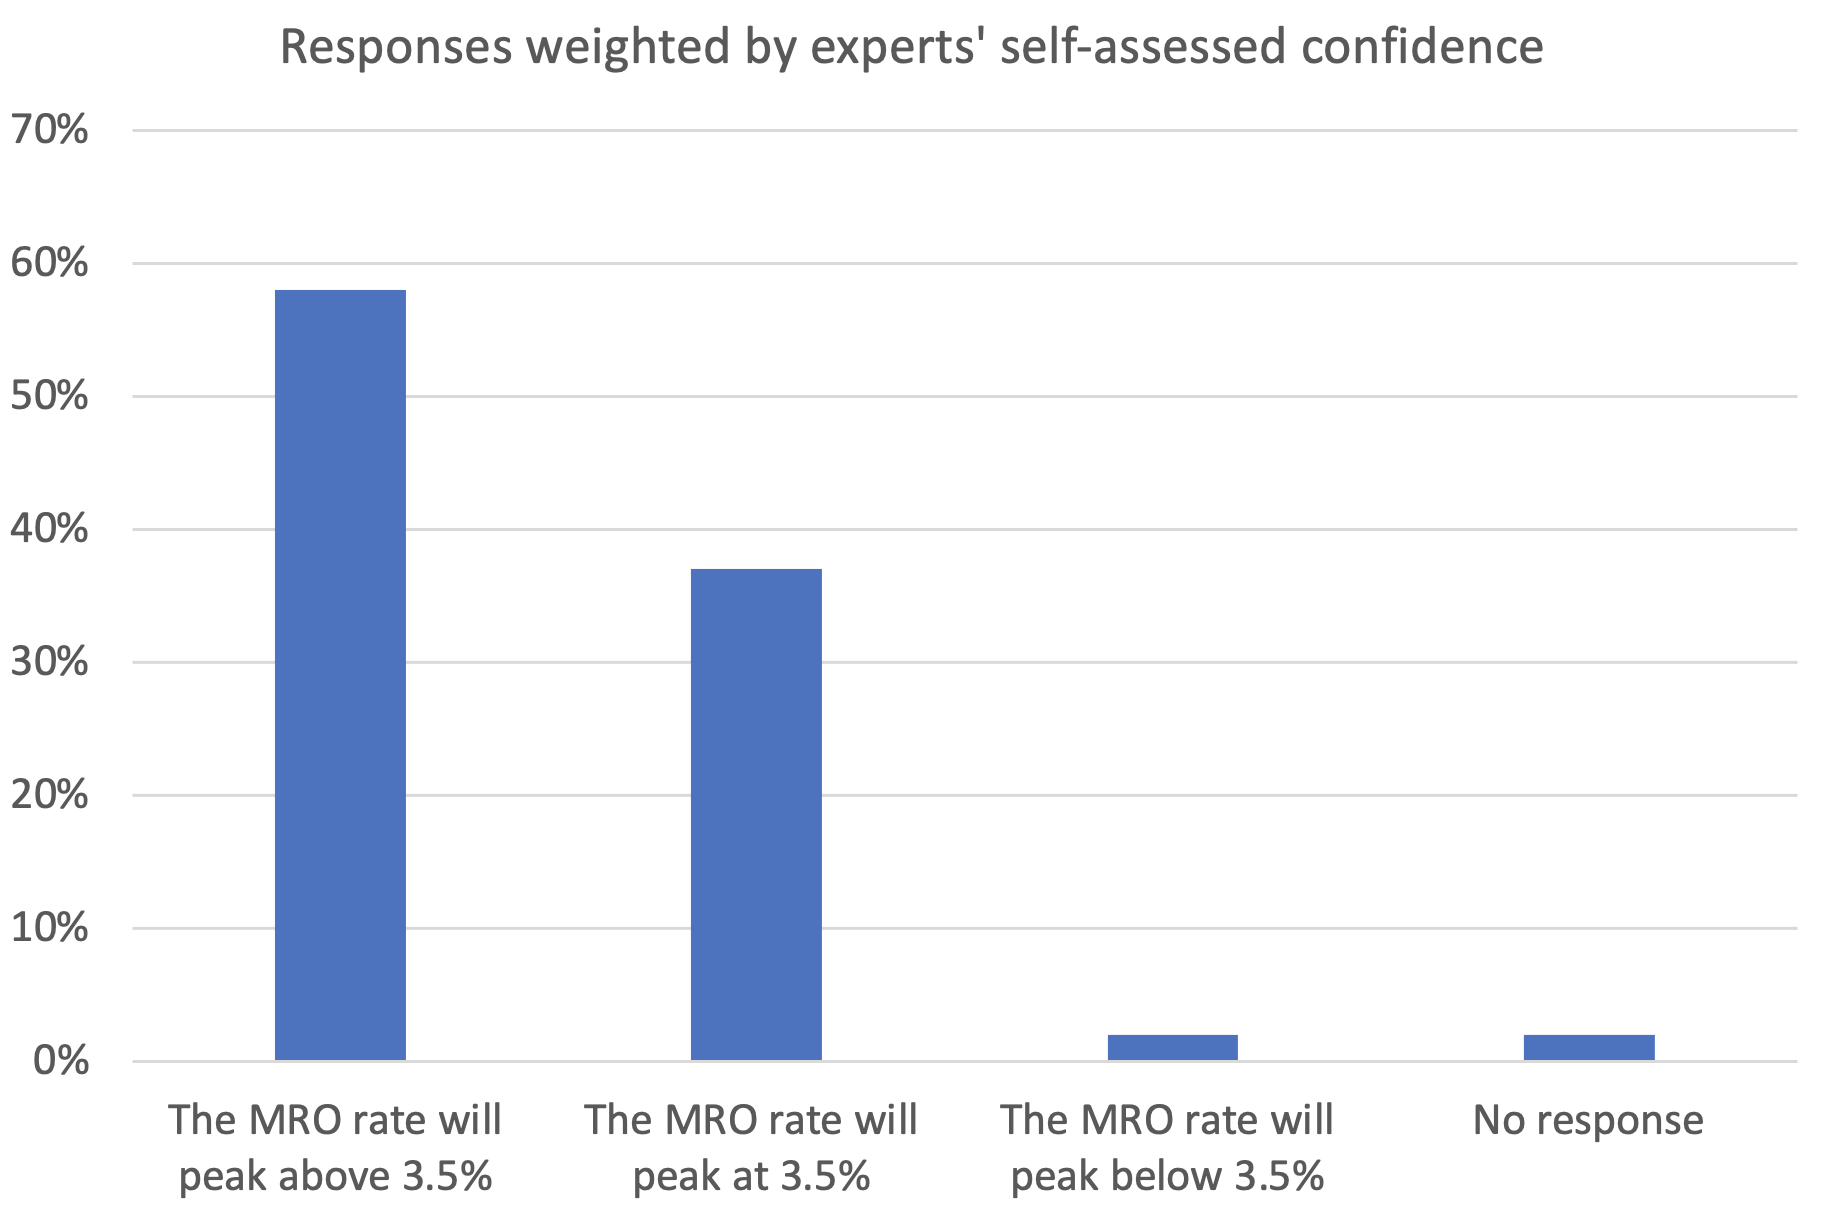 Question 2 Responses weighted by experts' self-assessed confidence